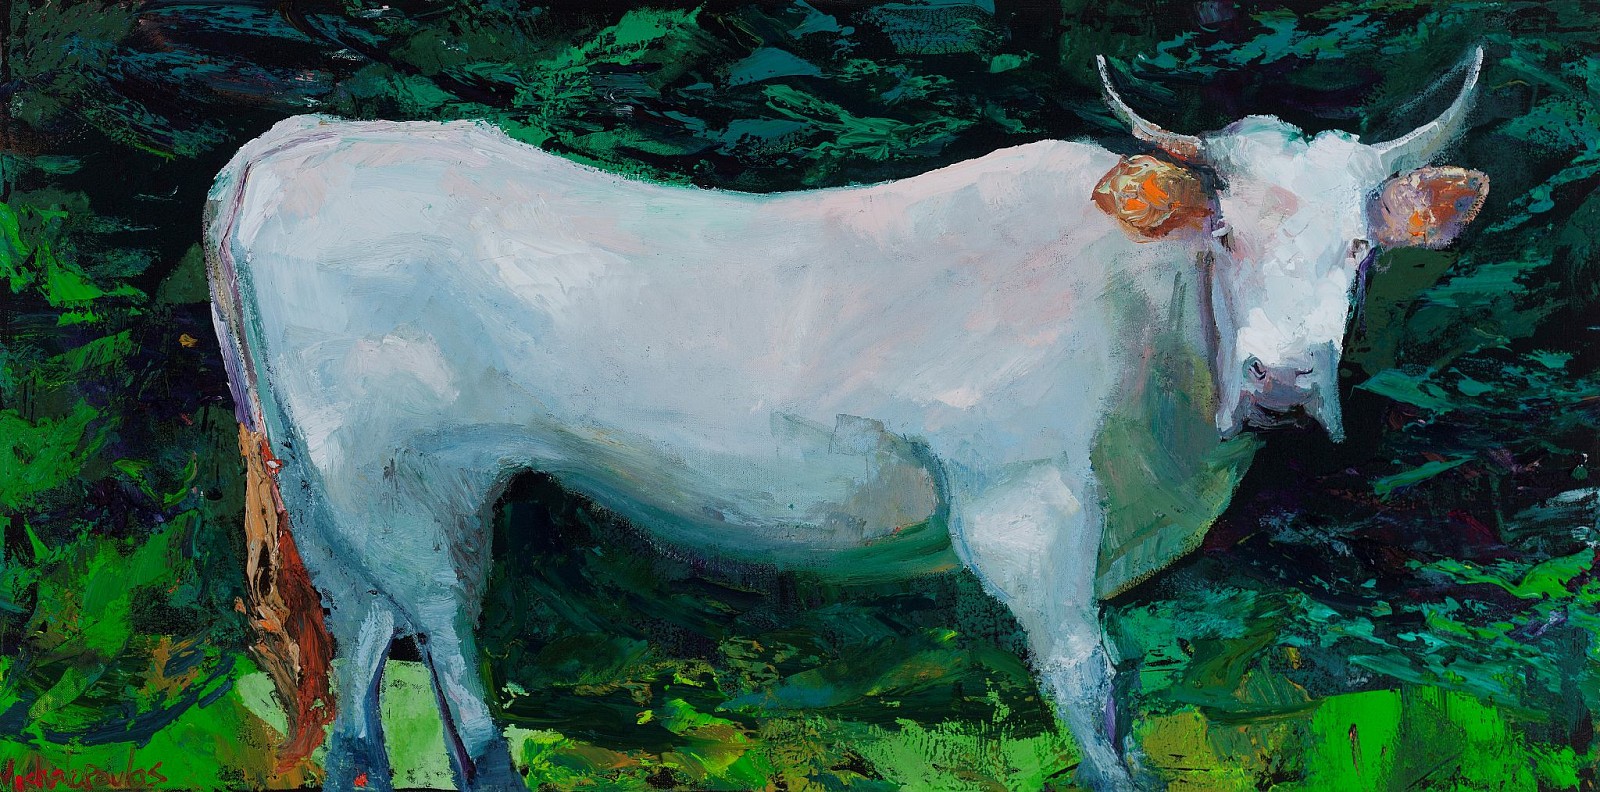 James Michalopoulos, Study for Beefy
Oil on Canvas, 24 x 48 in.
This work is currently on display at the Glade Arts Foundation Gallery in the Woodlands, Texas as a part of the "Tempting Spring: The Wondrous Works of James Michalopoulos" ​Exhibition.
$8,000